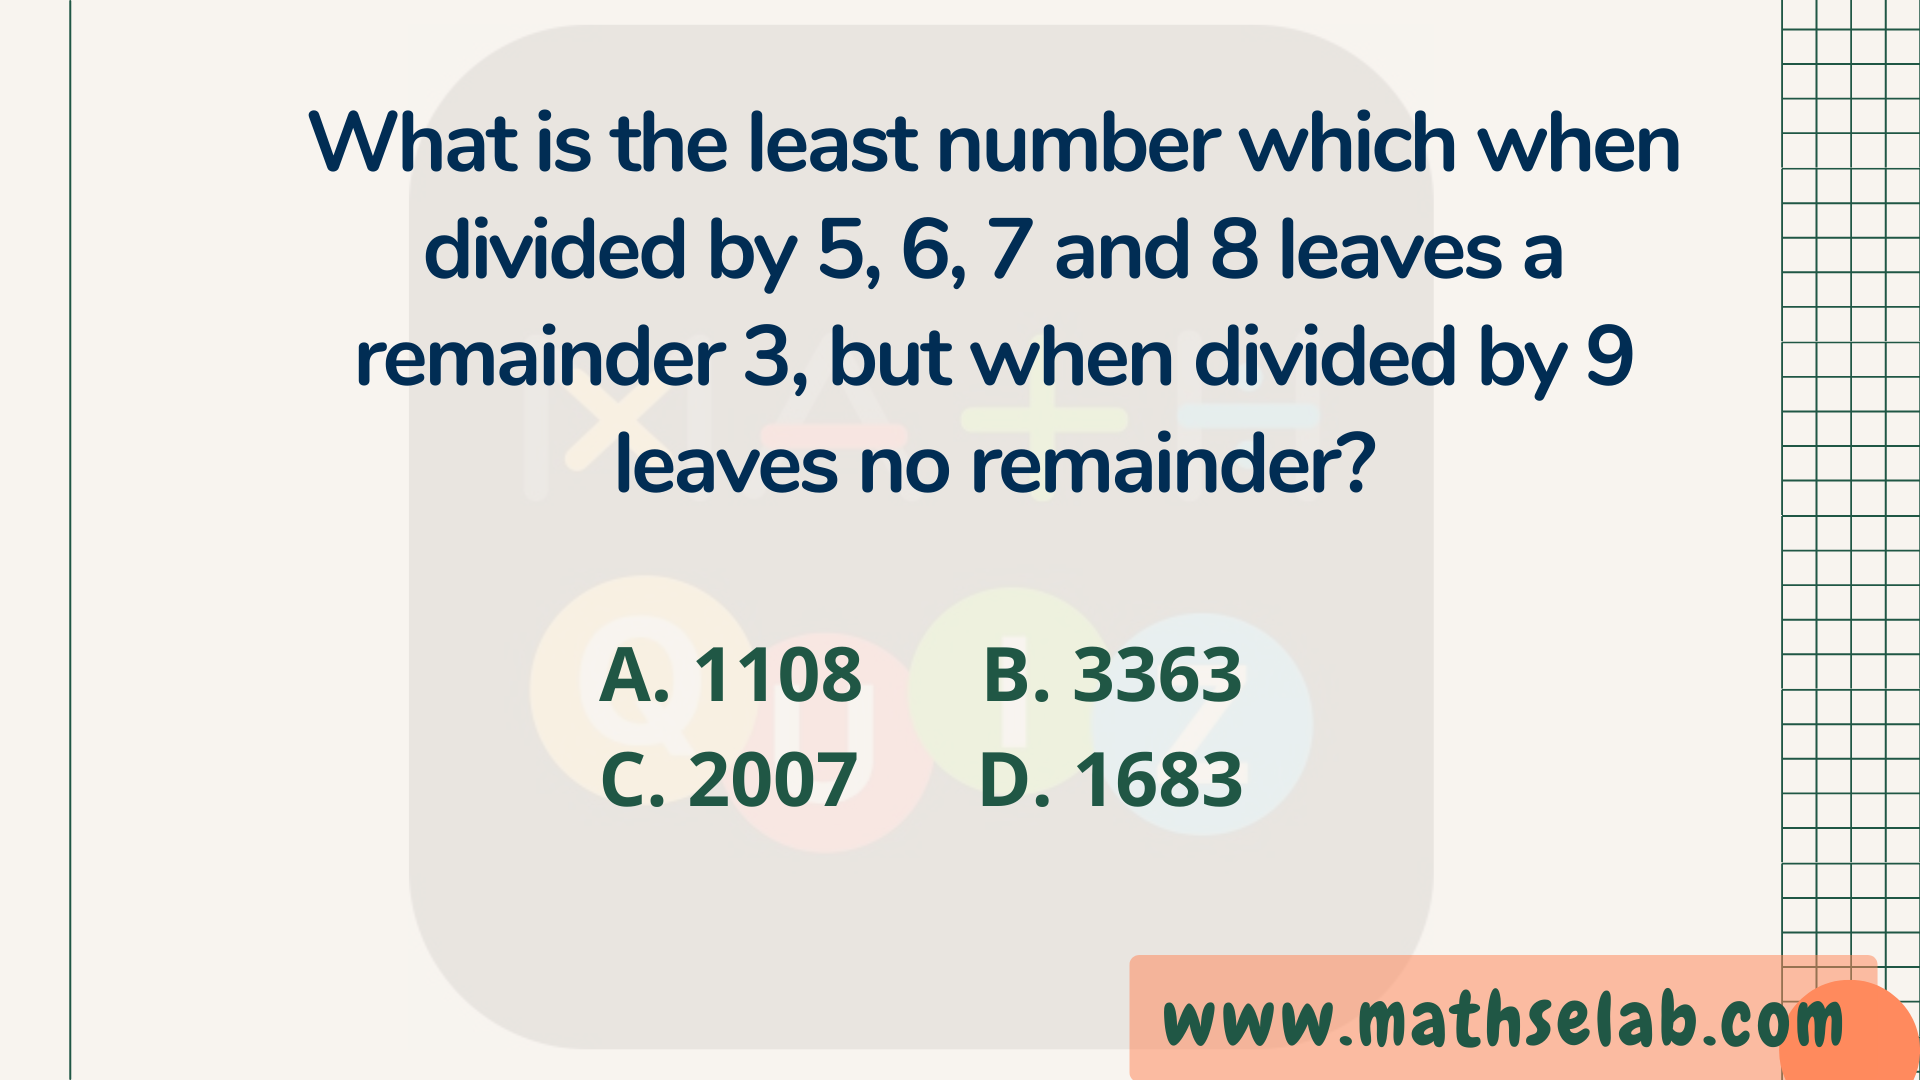 What is the least number which when divided by 5, 6, 7 and 8 leaves a remainder 3, but when divided by 9 leaves no remainder?